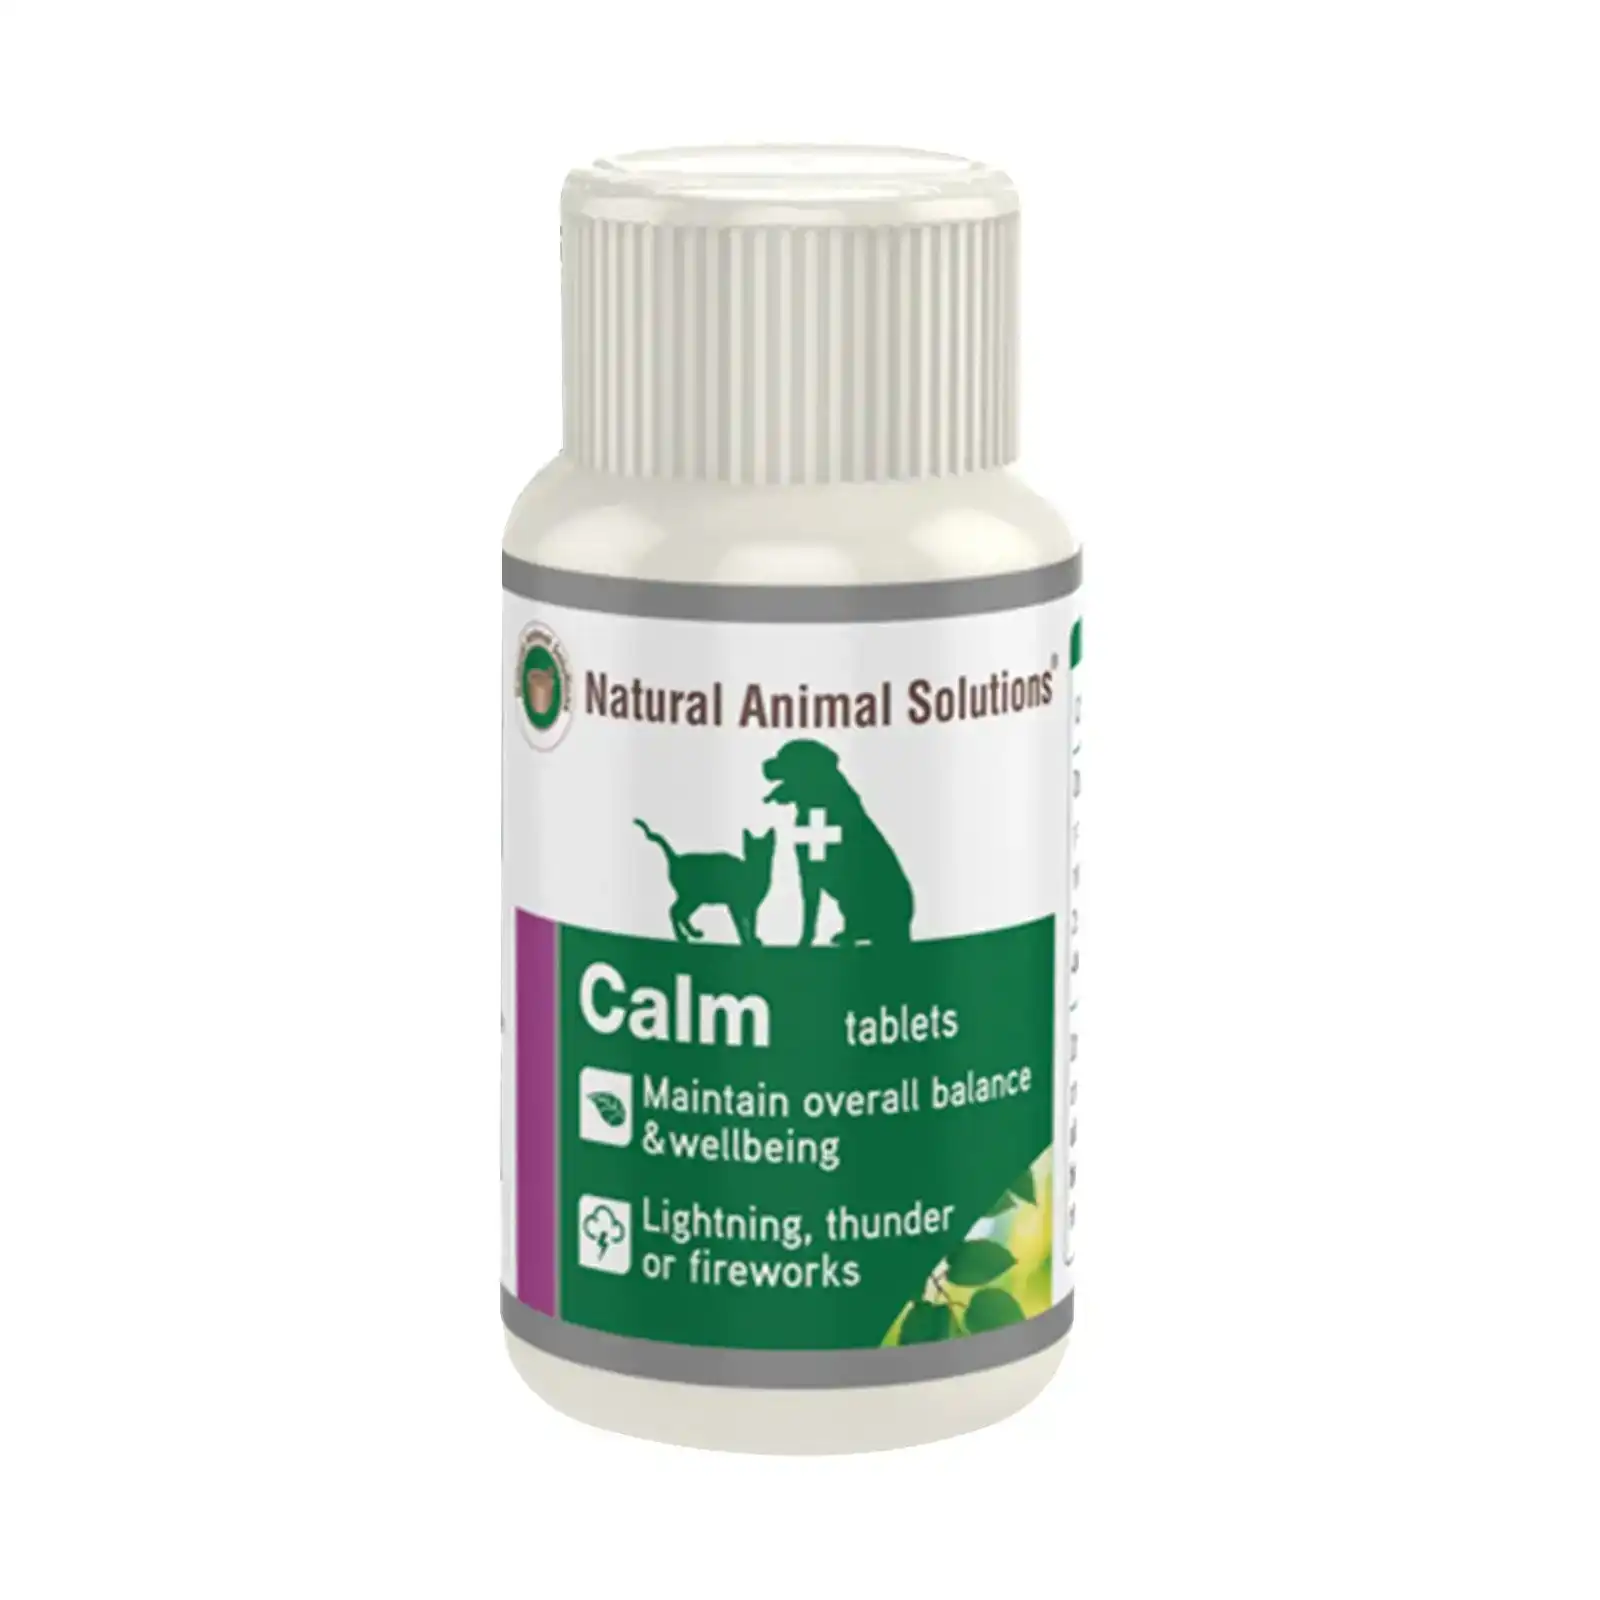 Natural Animal Solutions Calm Tablets For Dogs & Cats 60 Tablets